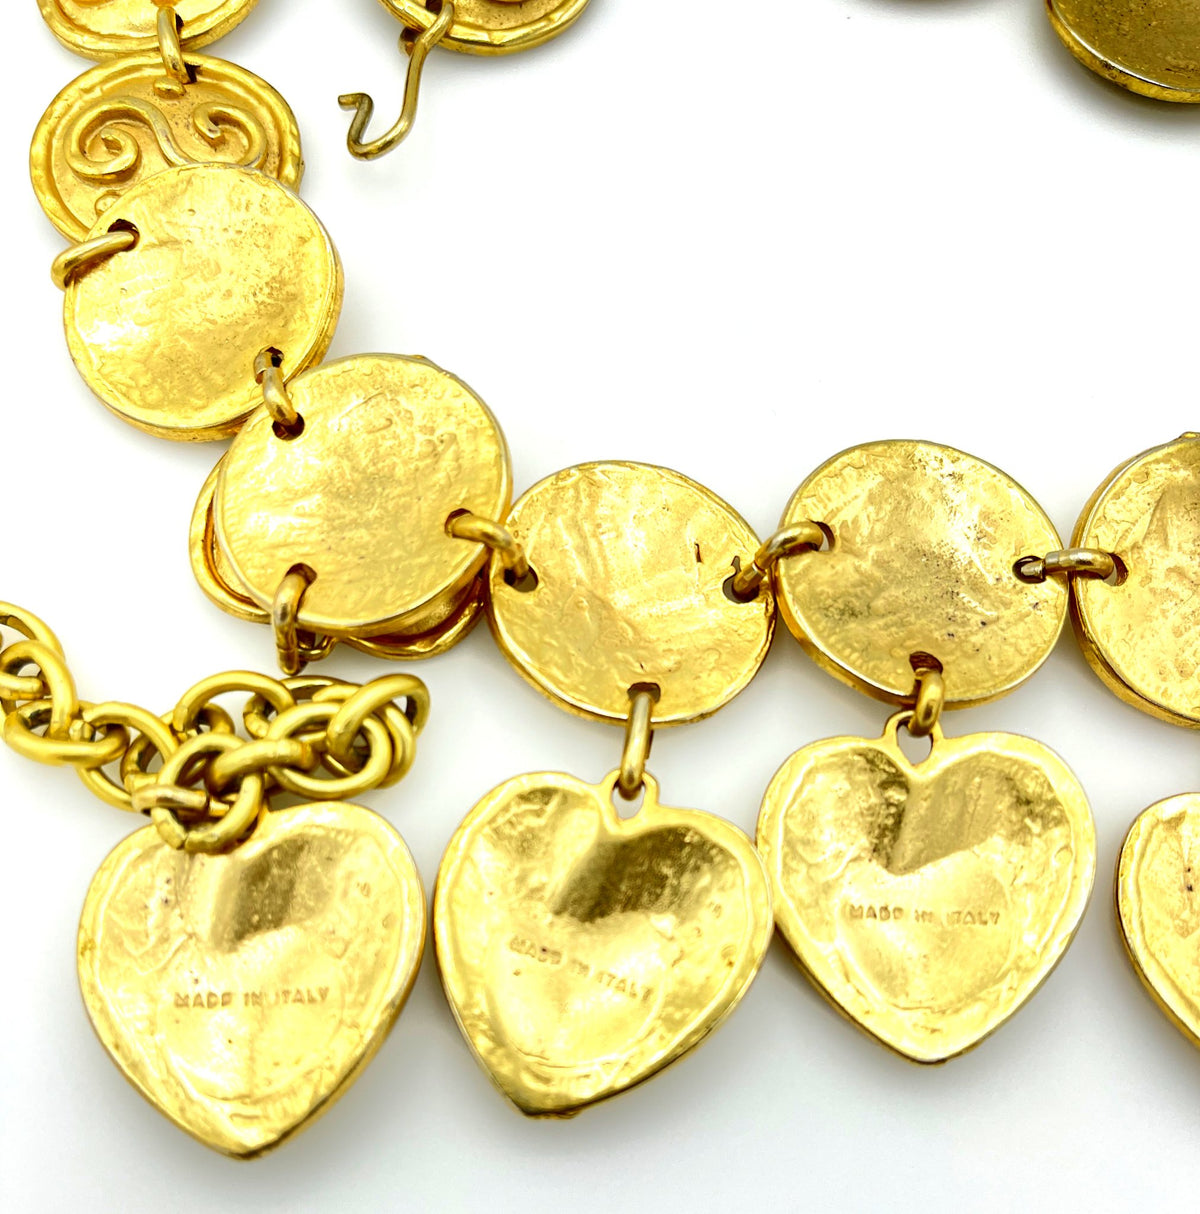 Edouard Rambaud Gold Heart Charm Chain Vintage Etruscan Statement Belt - 24 Wishes Vintage Jewelry